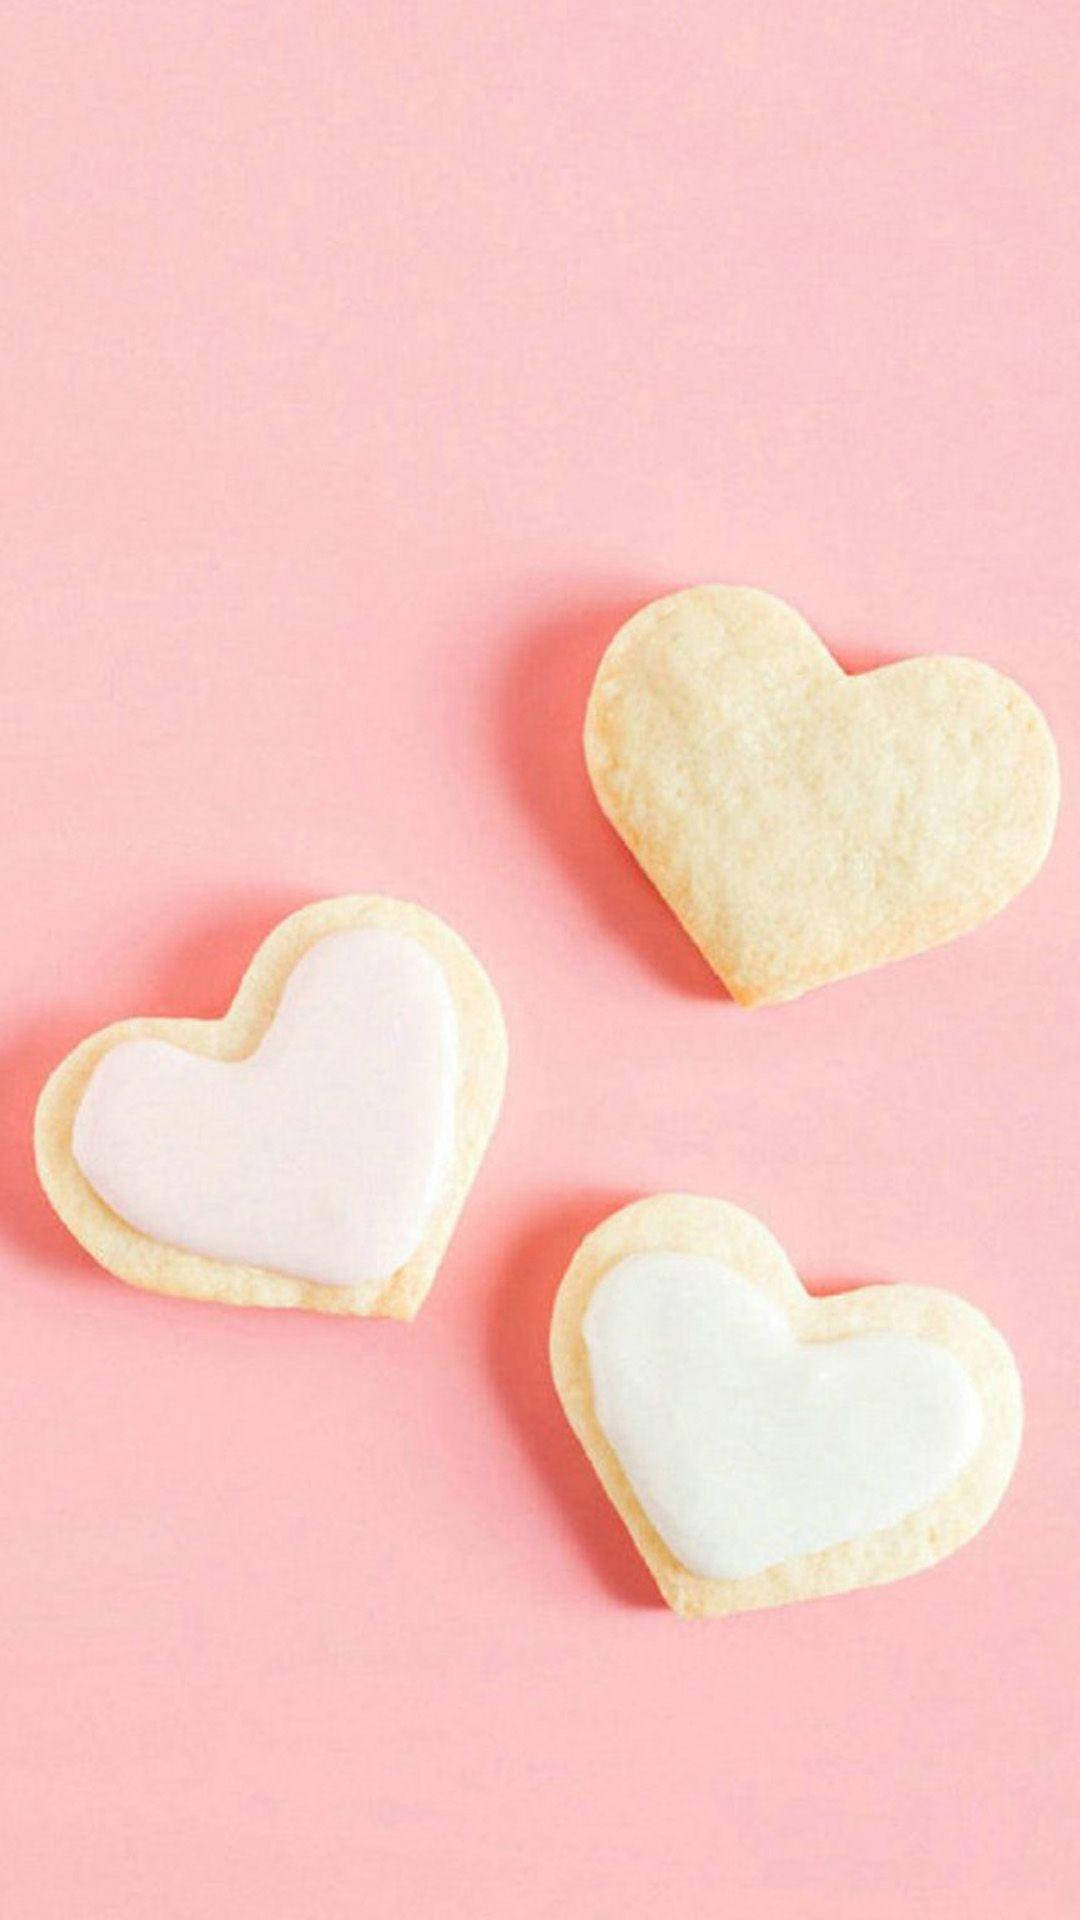 Adorable Heart-shaped Cookies With Filling